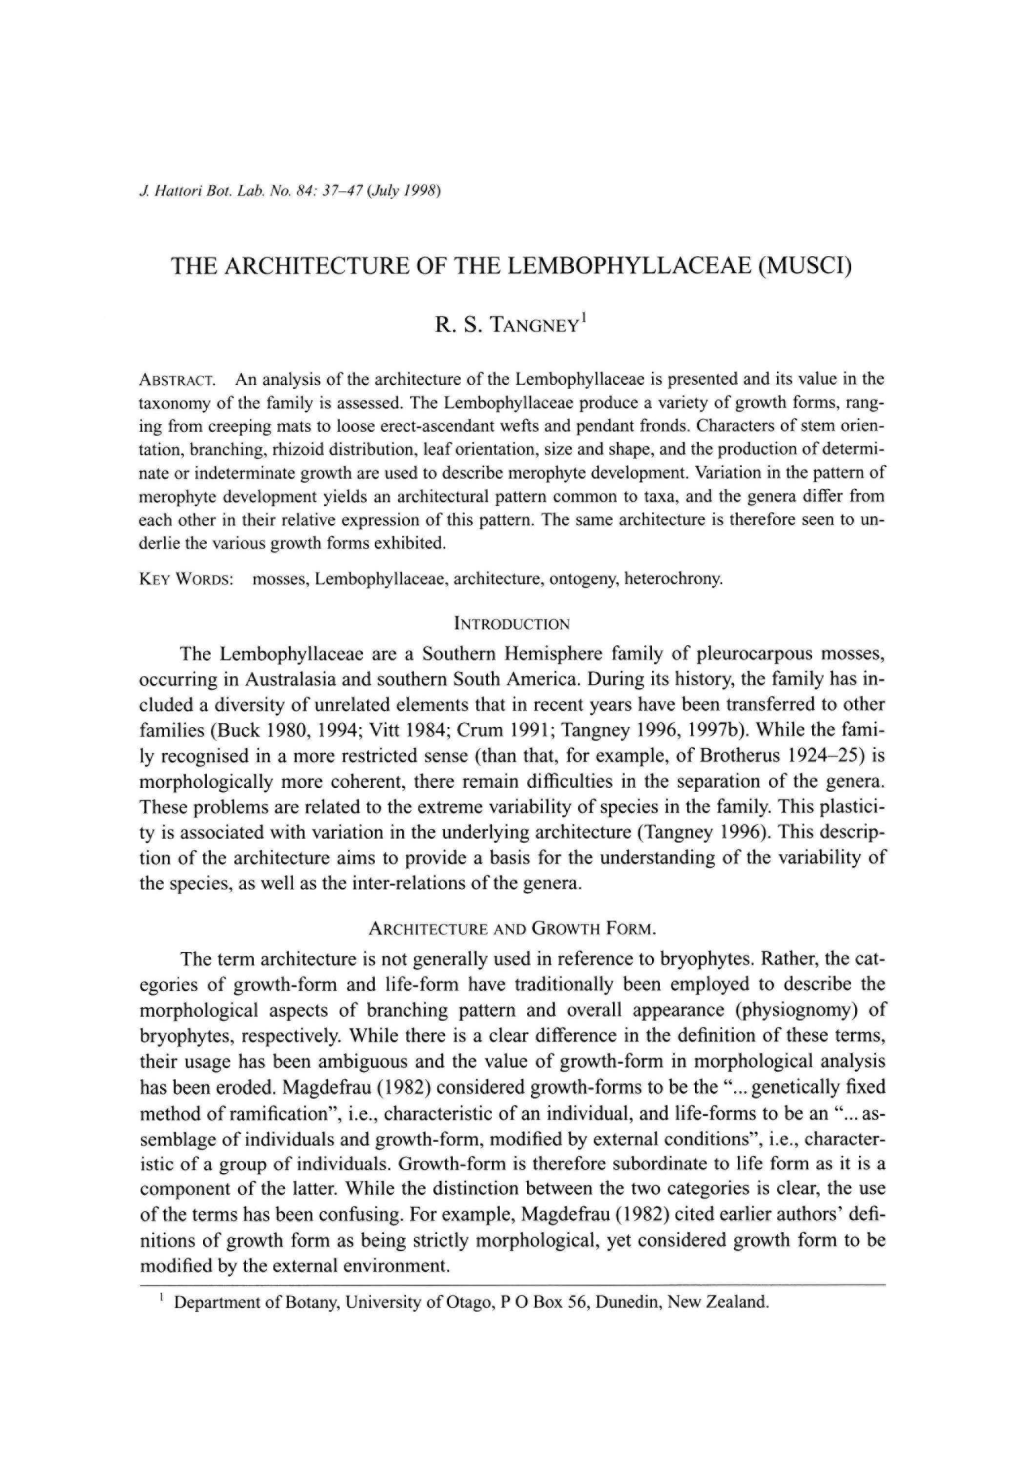 The Architecture of the Lembophyllaceae (Musci)